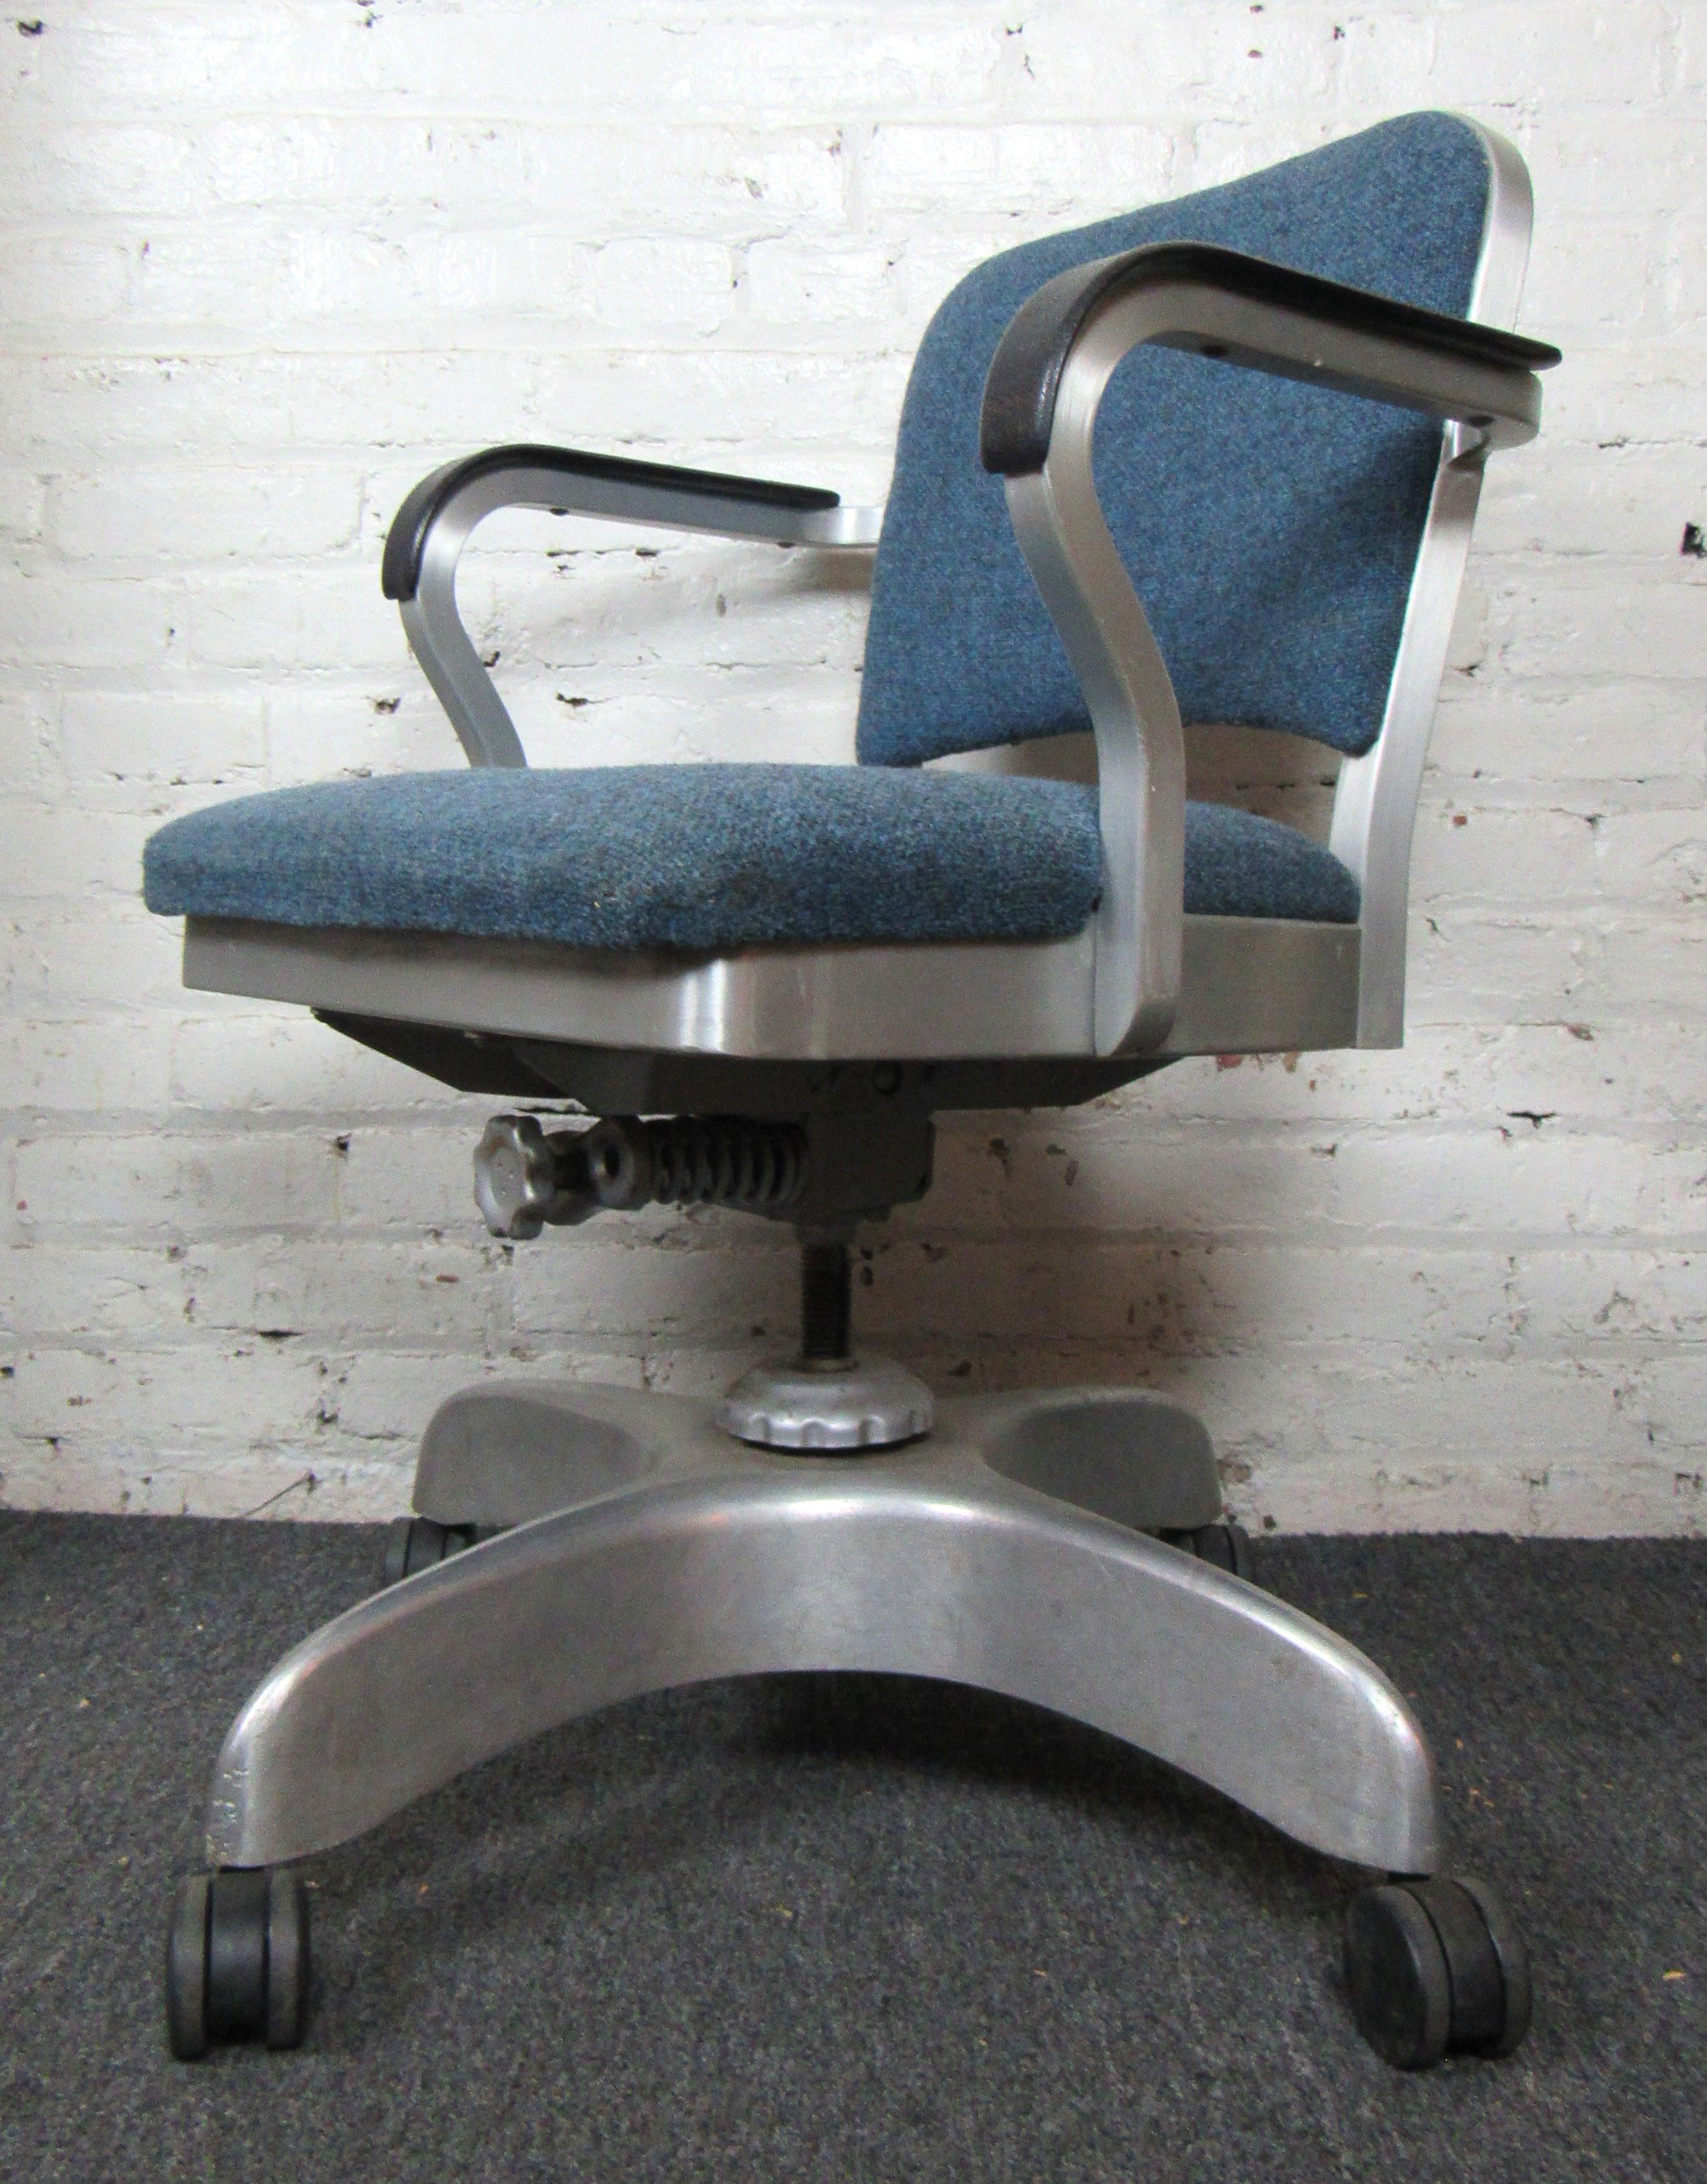 Vintage desk chair by prominent chair manufacturer Emeco. Soft cushions upholstered in blue fabric, rolling casters and adjustable seat. Emeco chairs are famous for their durability, comfort, and iconic design. Chair comes with original delivery tag